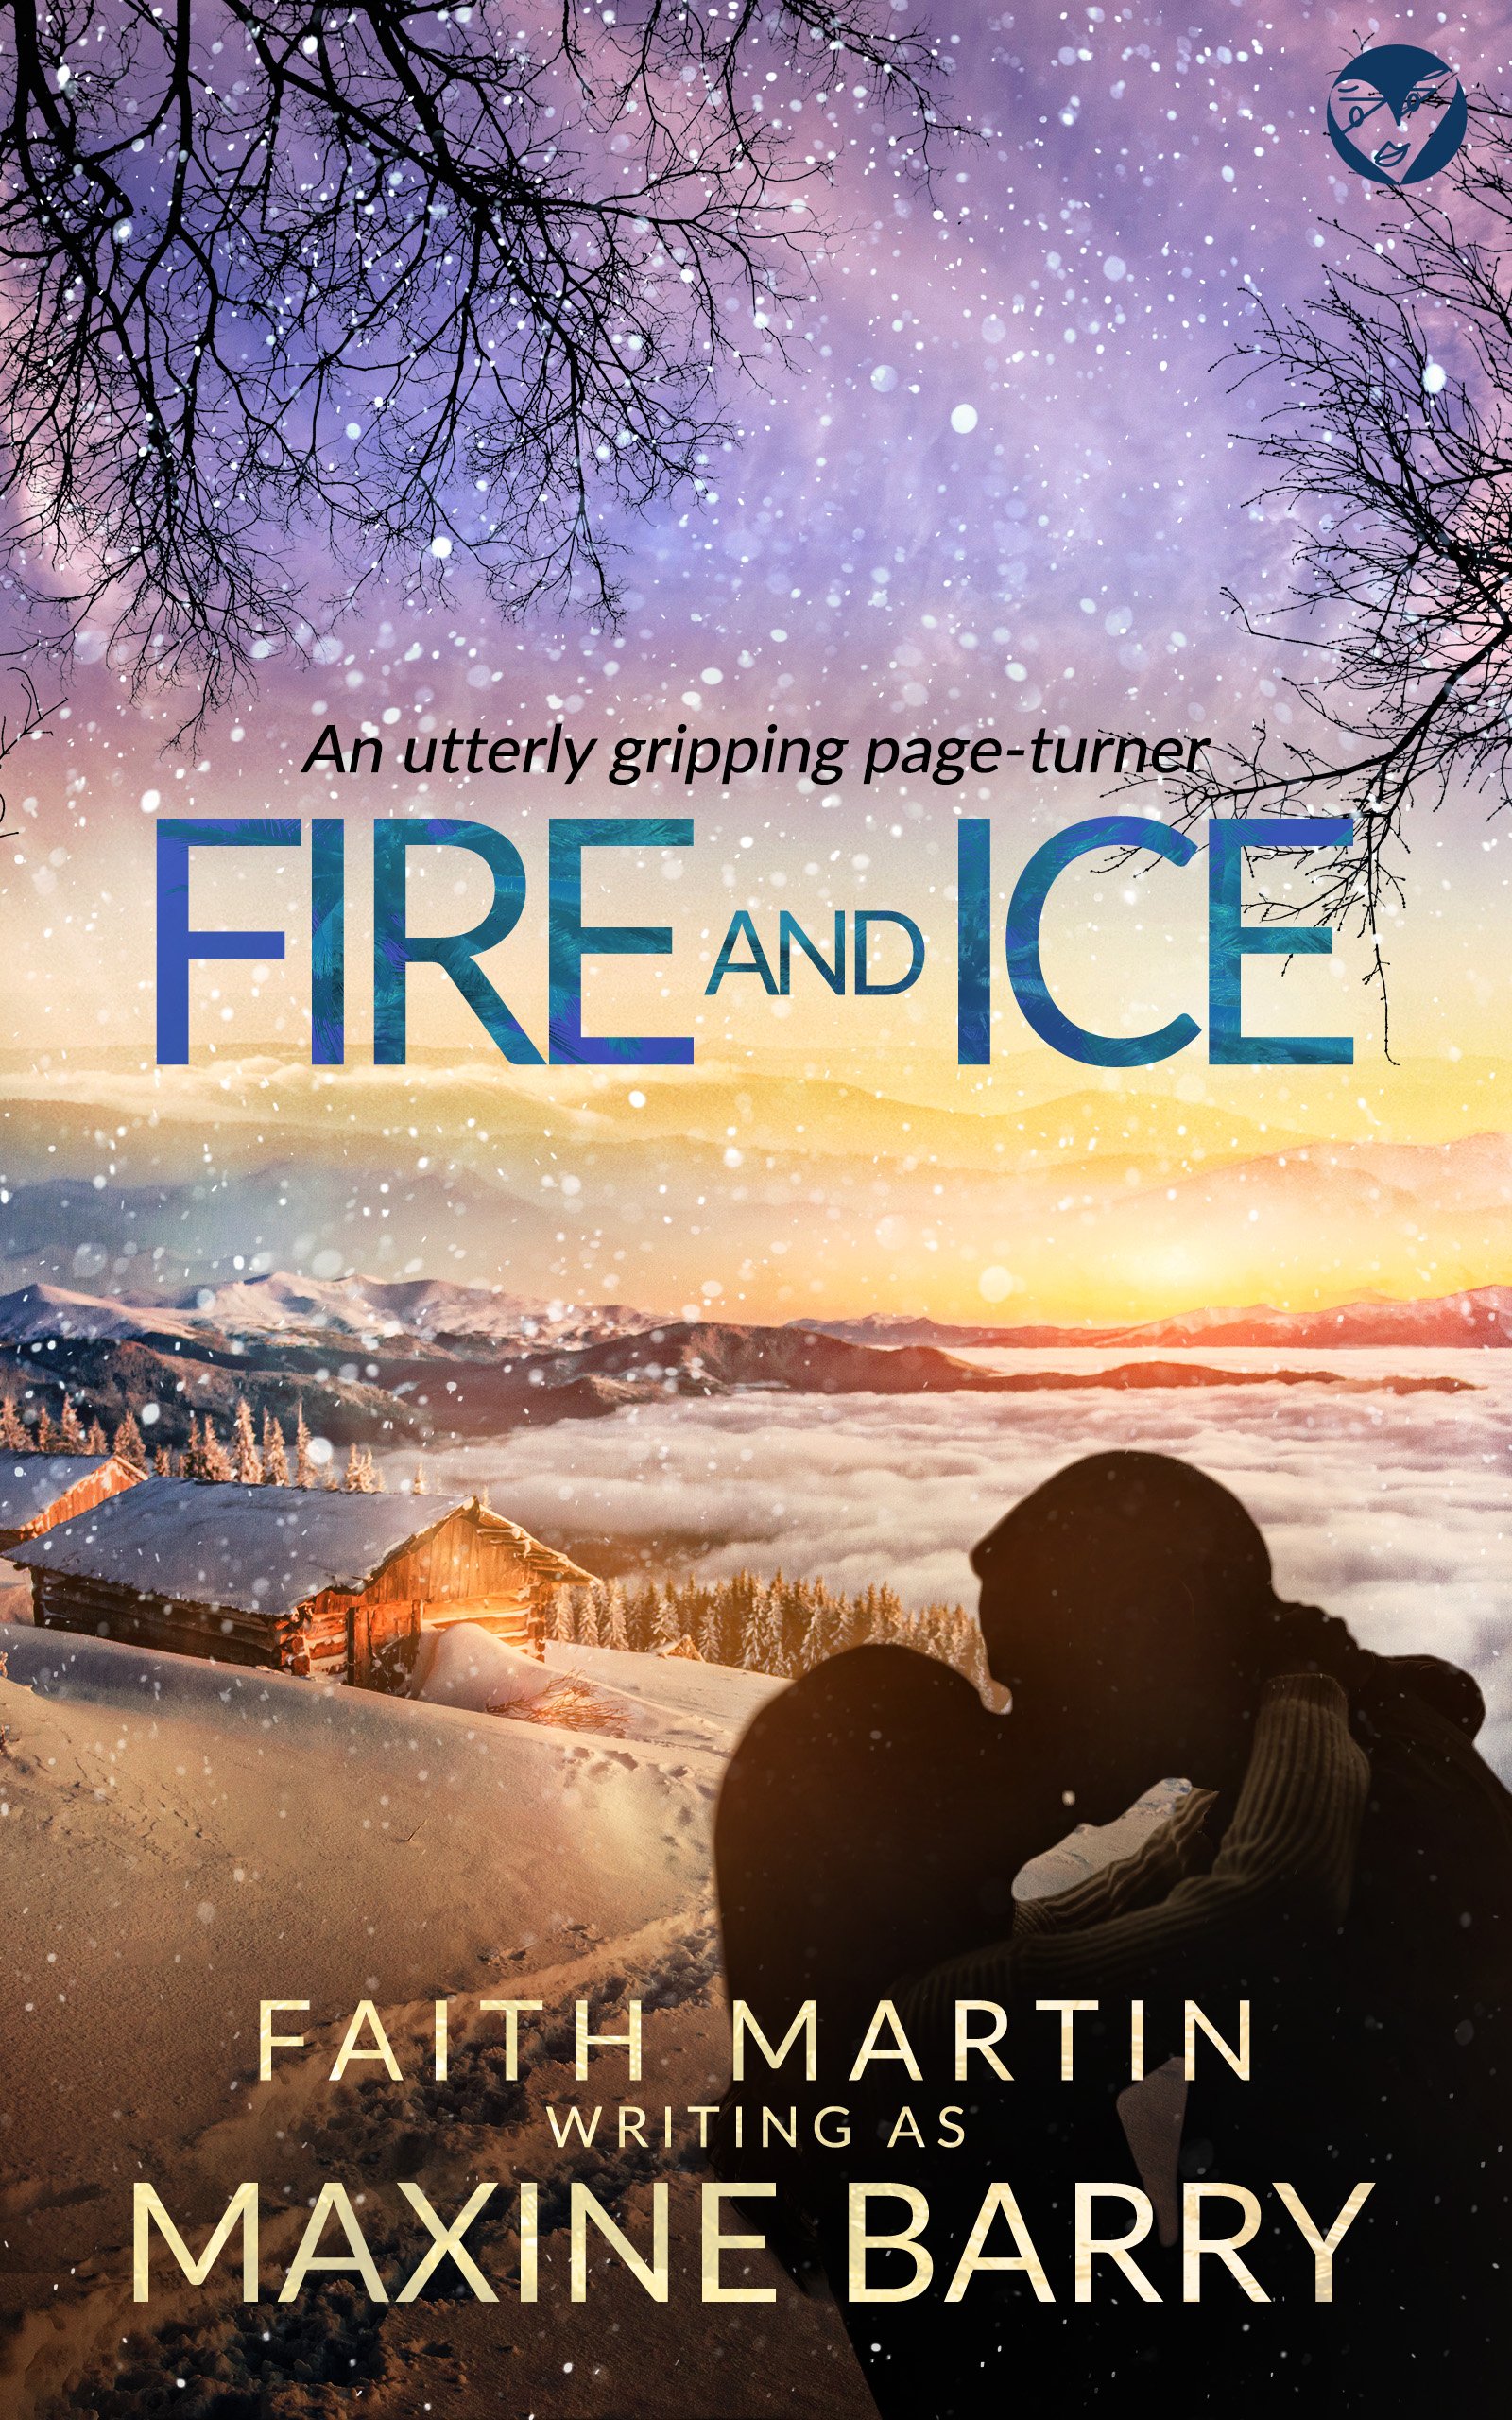 FIRE AND ICE Cover publish.jpg